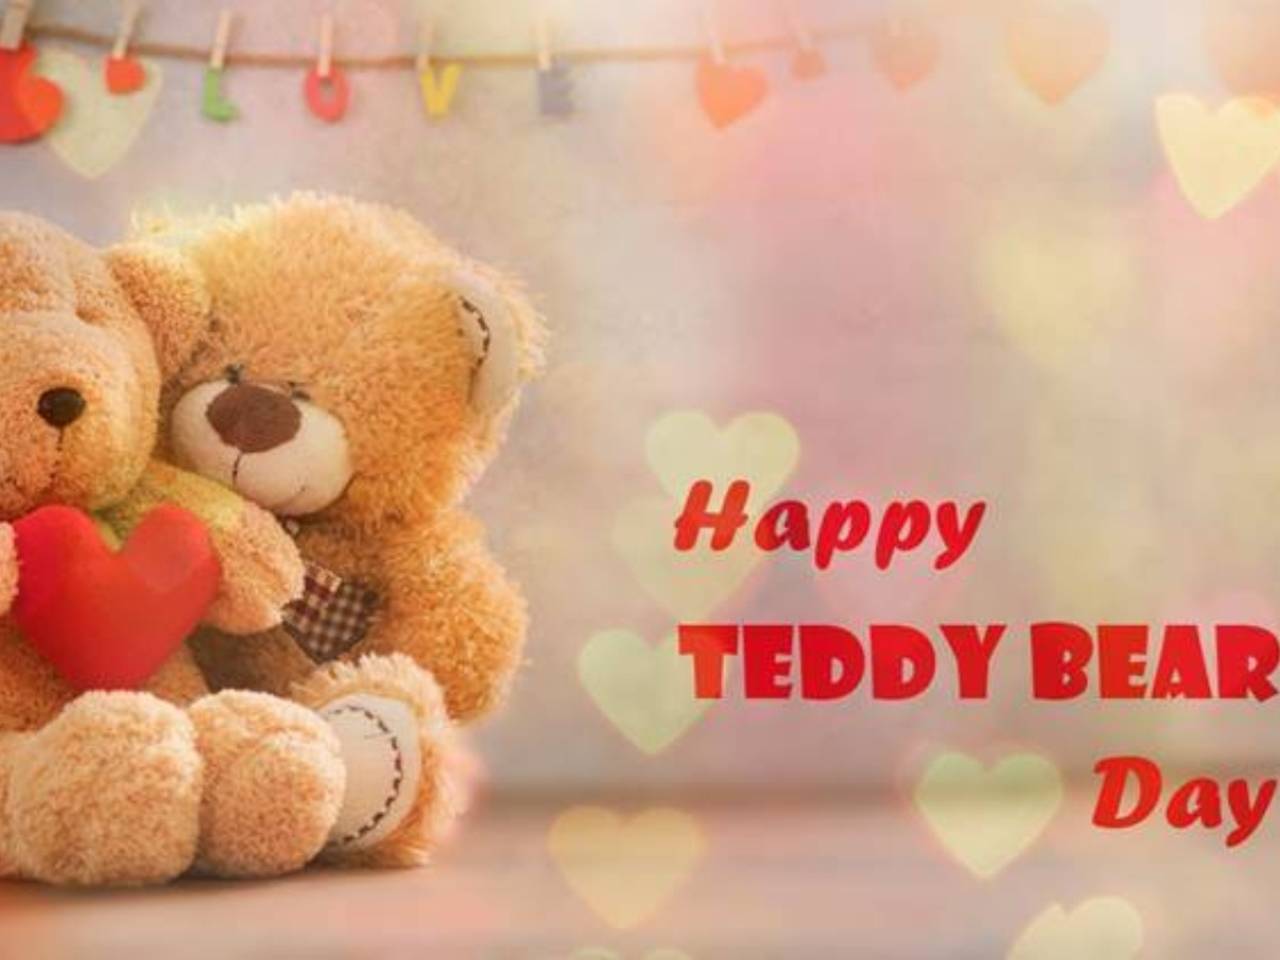 Happy Teddy Day 2021 Images, Quotes, Wishes, Messages, Cards, Greetings, and GIFs image